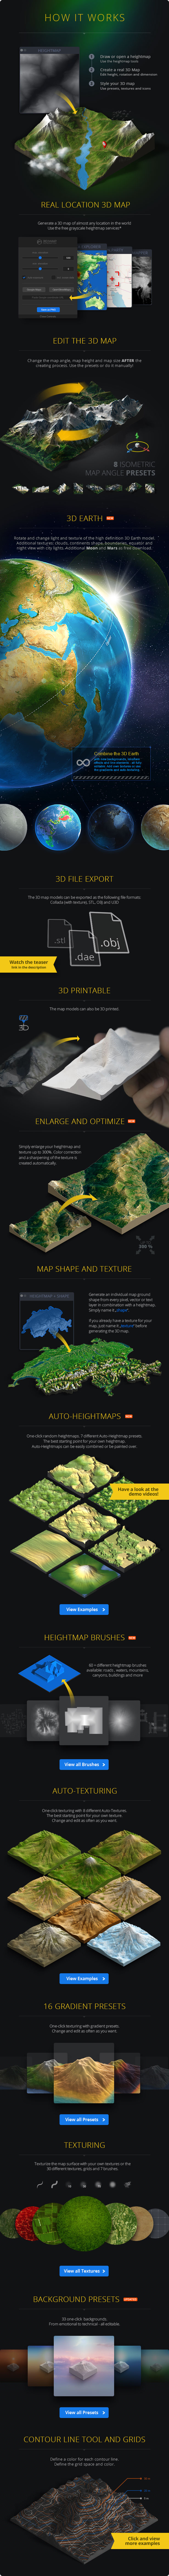 3D Map Generator - Atlas - From Heightmap to real 3D map - 1